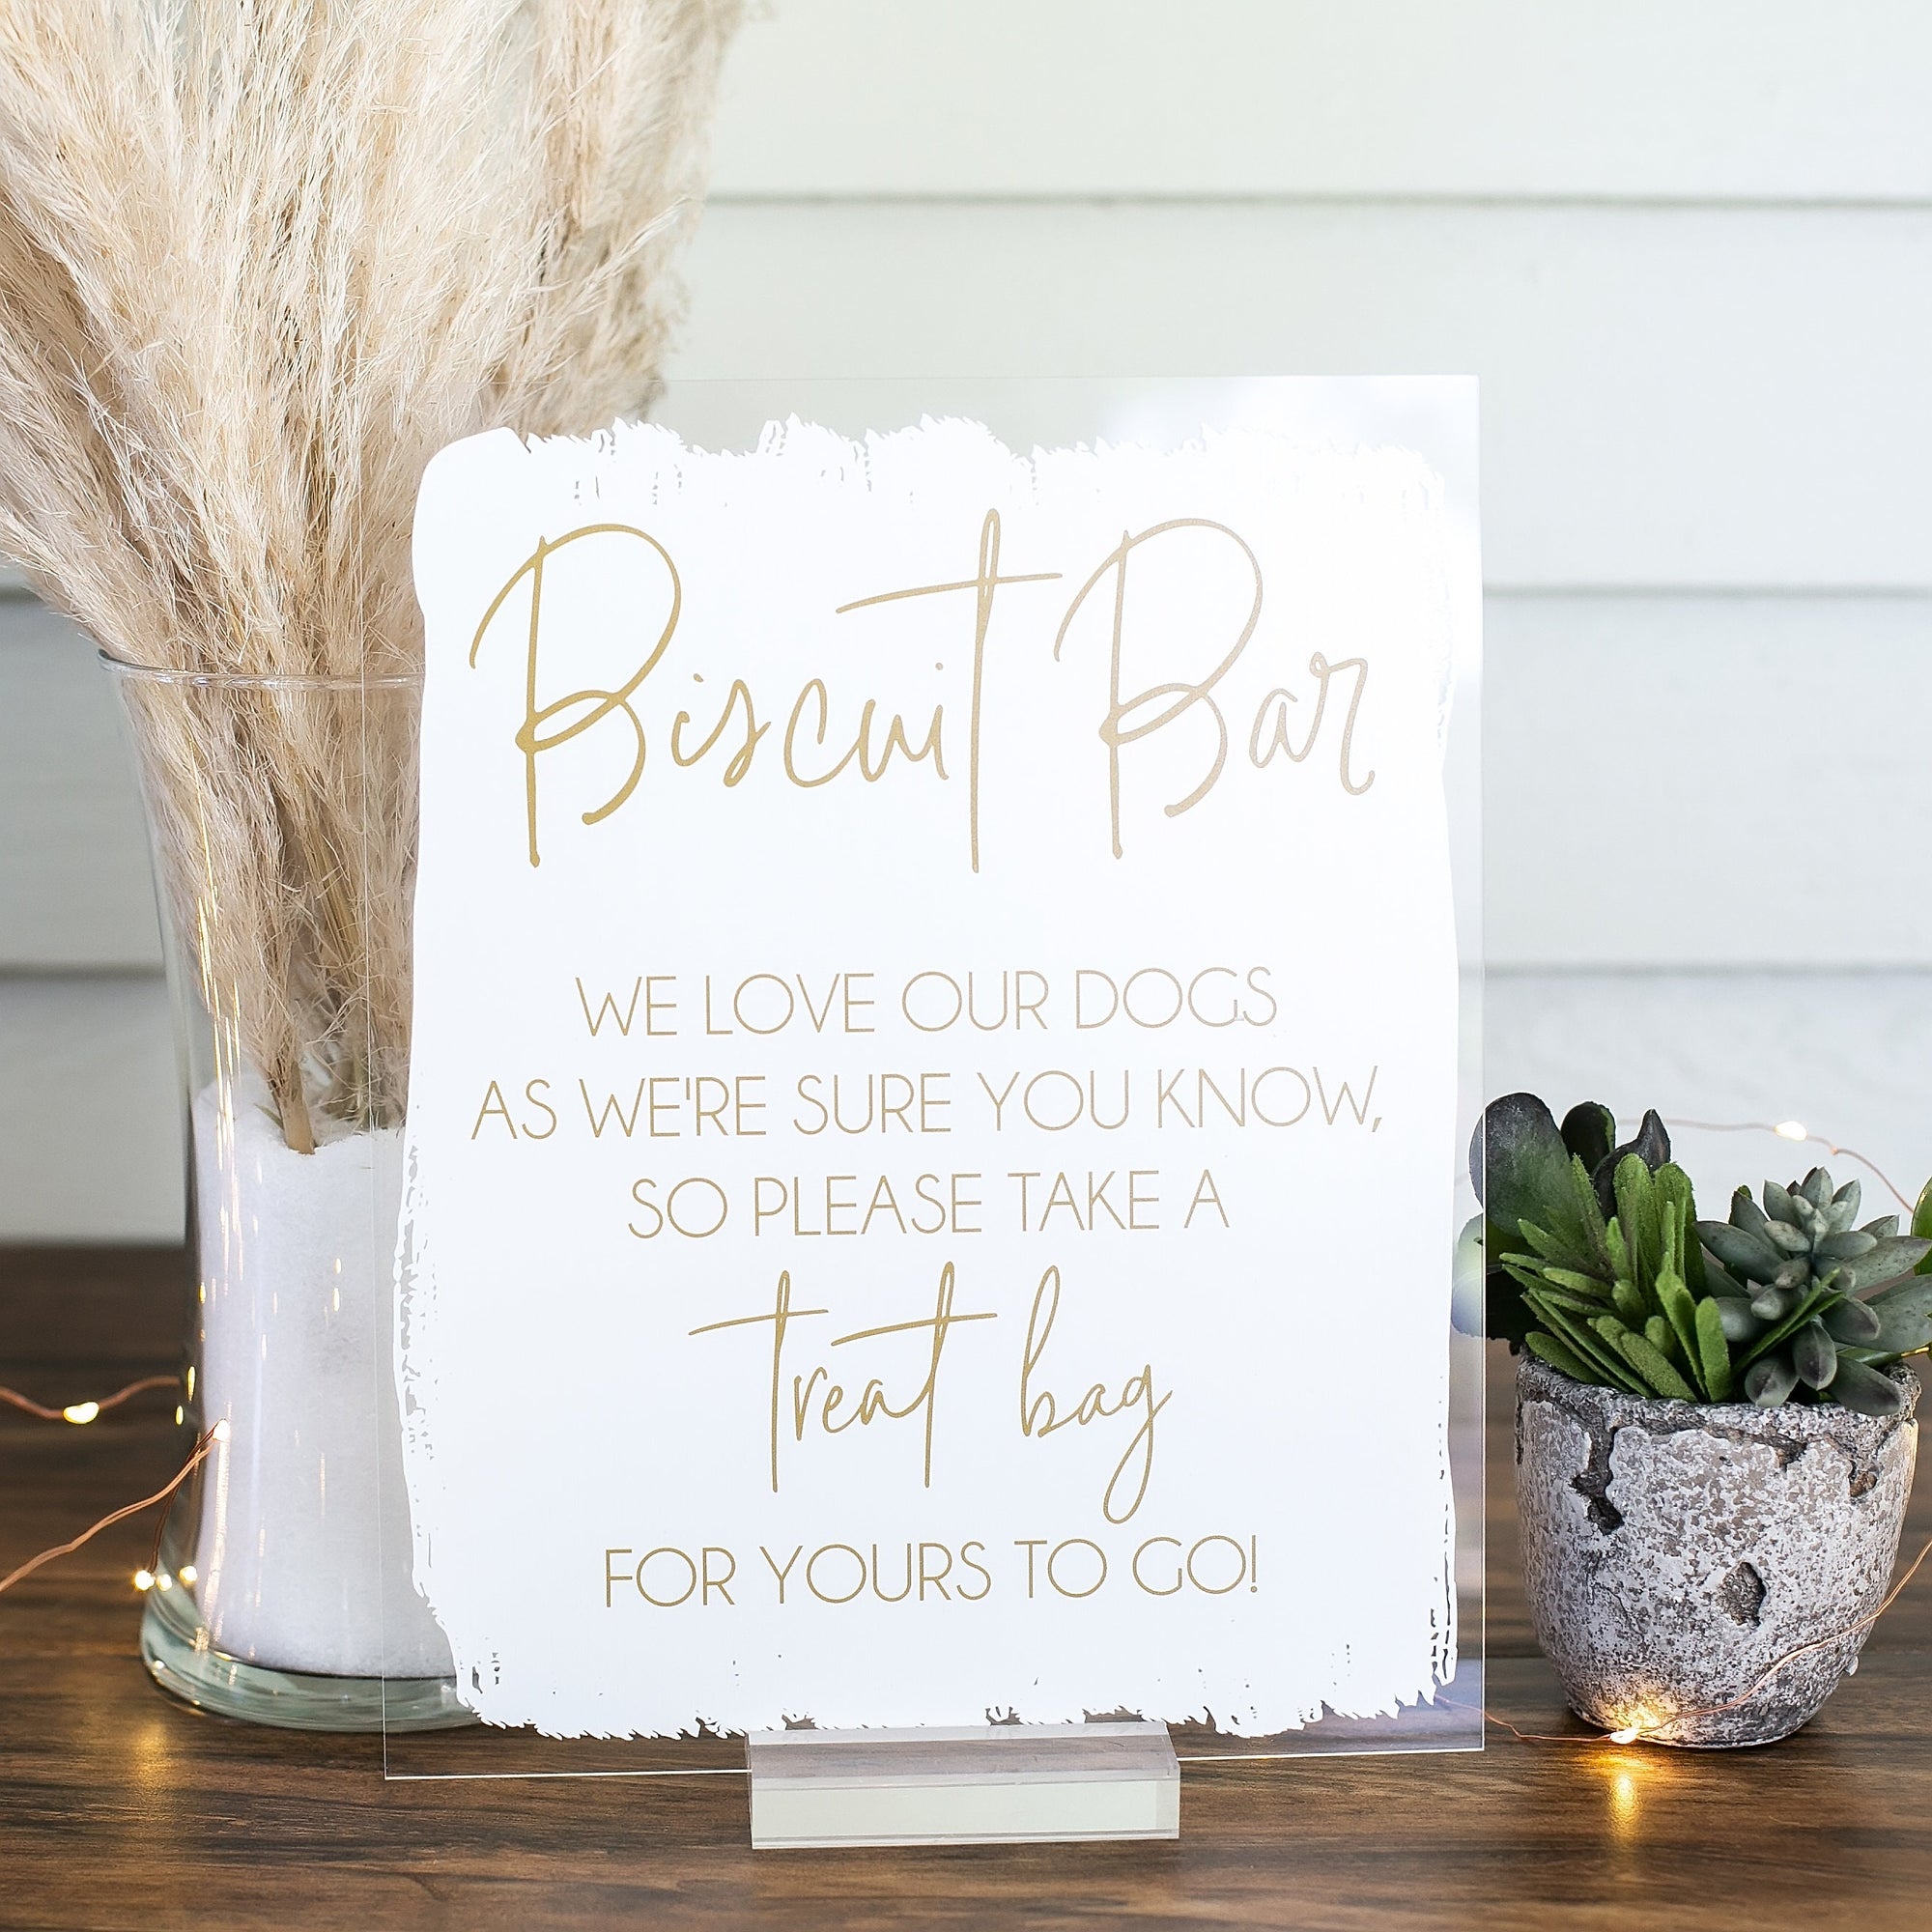 Biscuit Bar Doggy Treat Bags S3-AS19